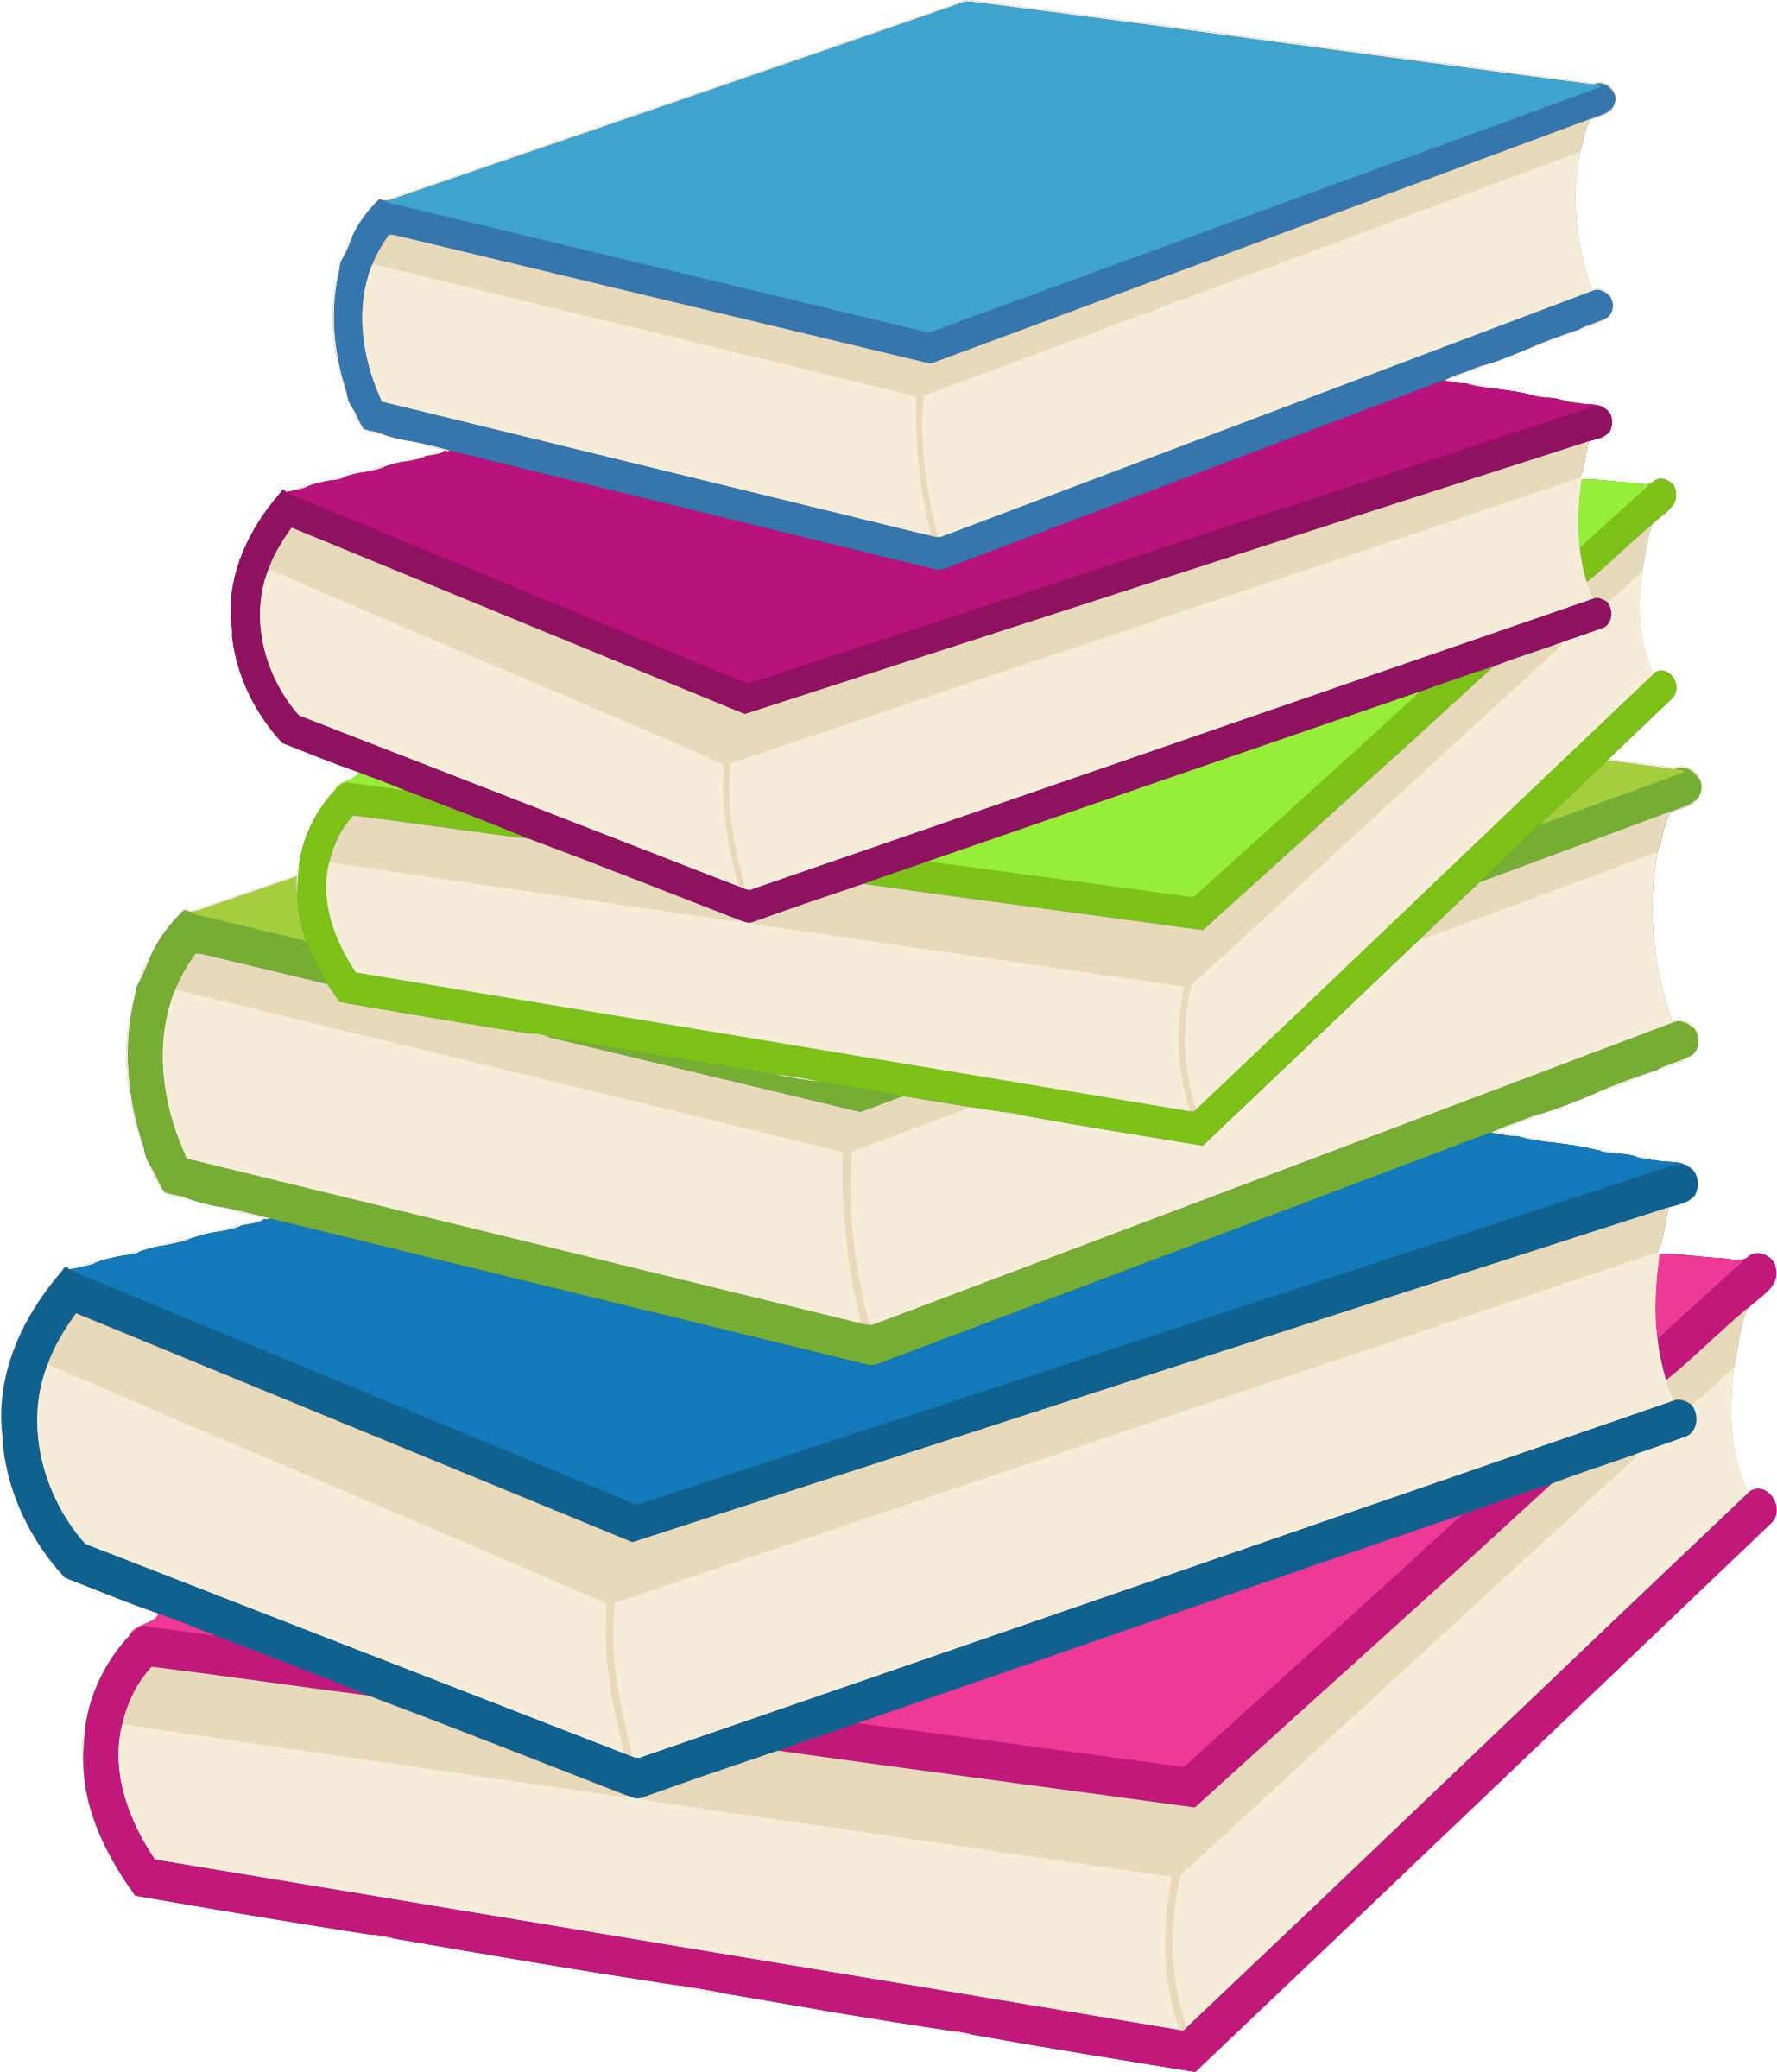 Book Sea Of Memories Library Clip Art Stack Of Books Png Download 20582400 Free 0357